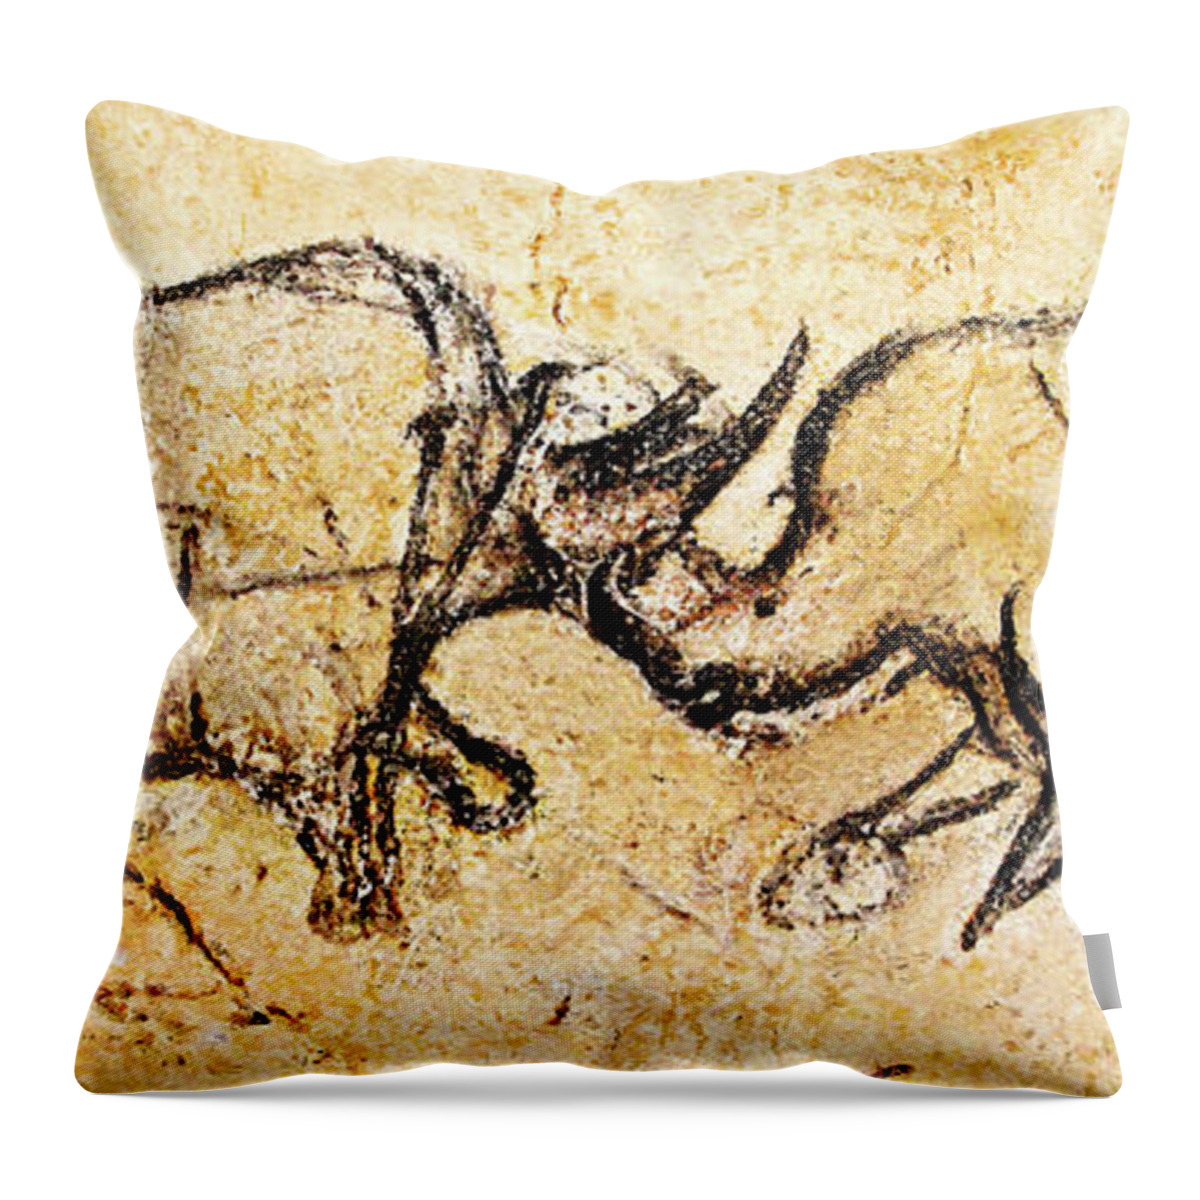 Chauvet Throw Pillow featuring the painting Chauvet Rhinoceros in Combat by Weston Westmoreland